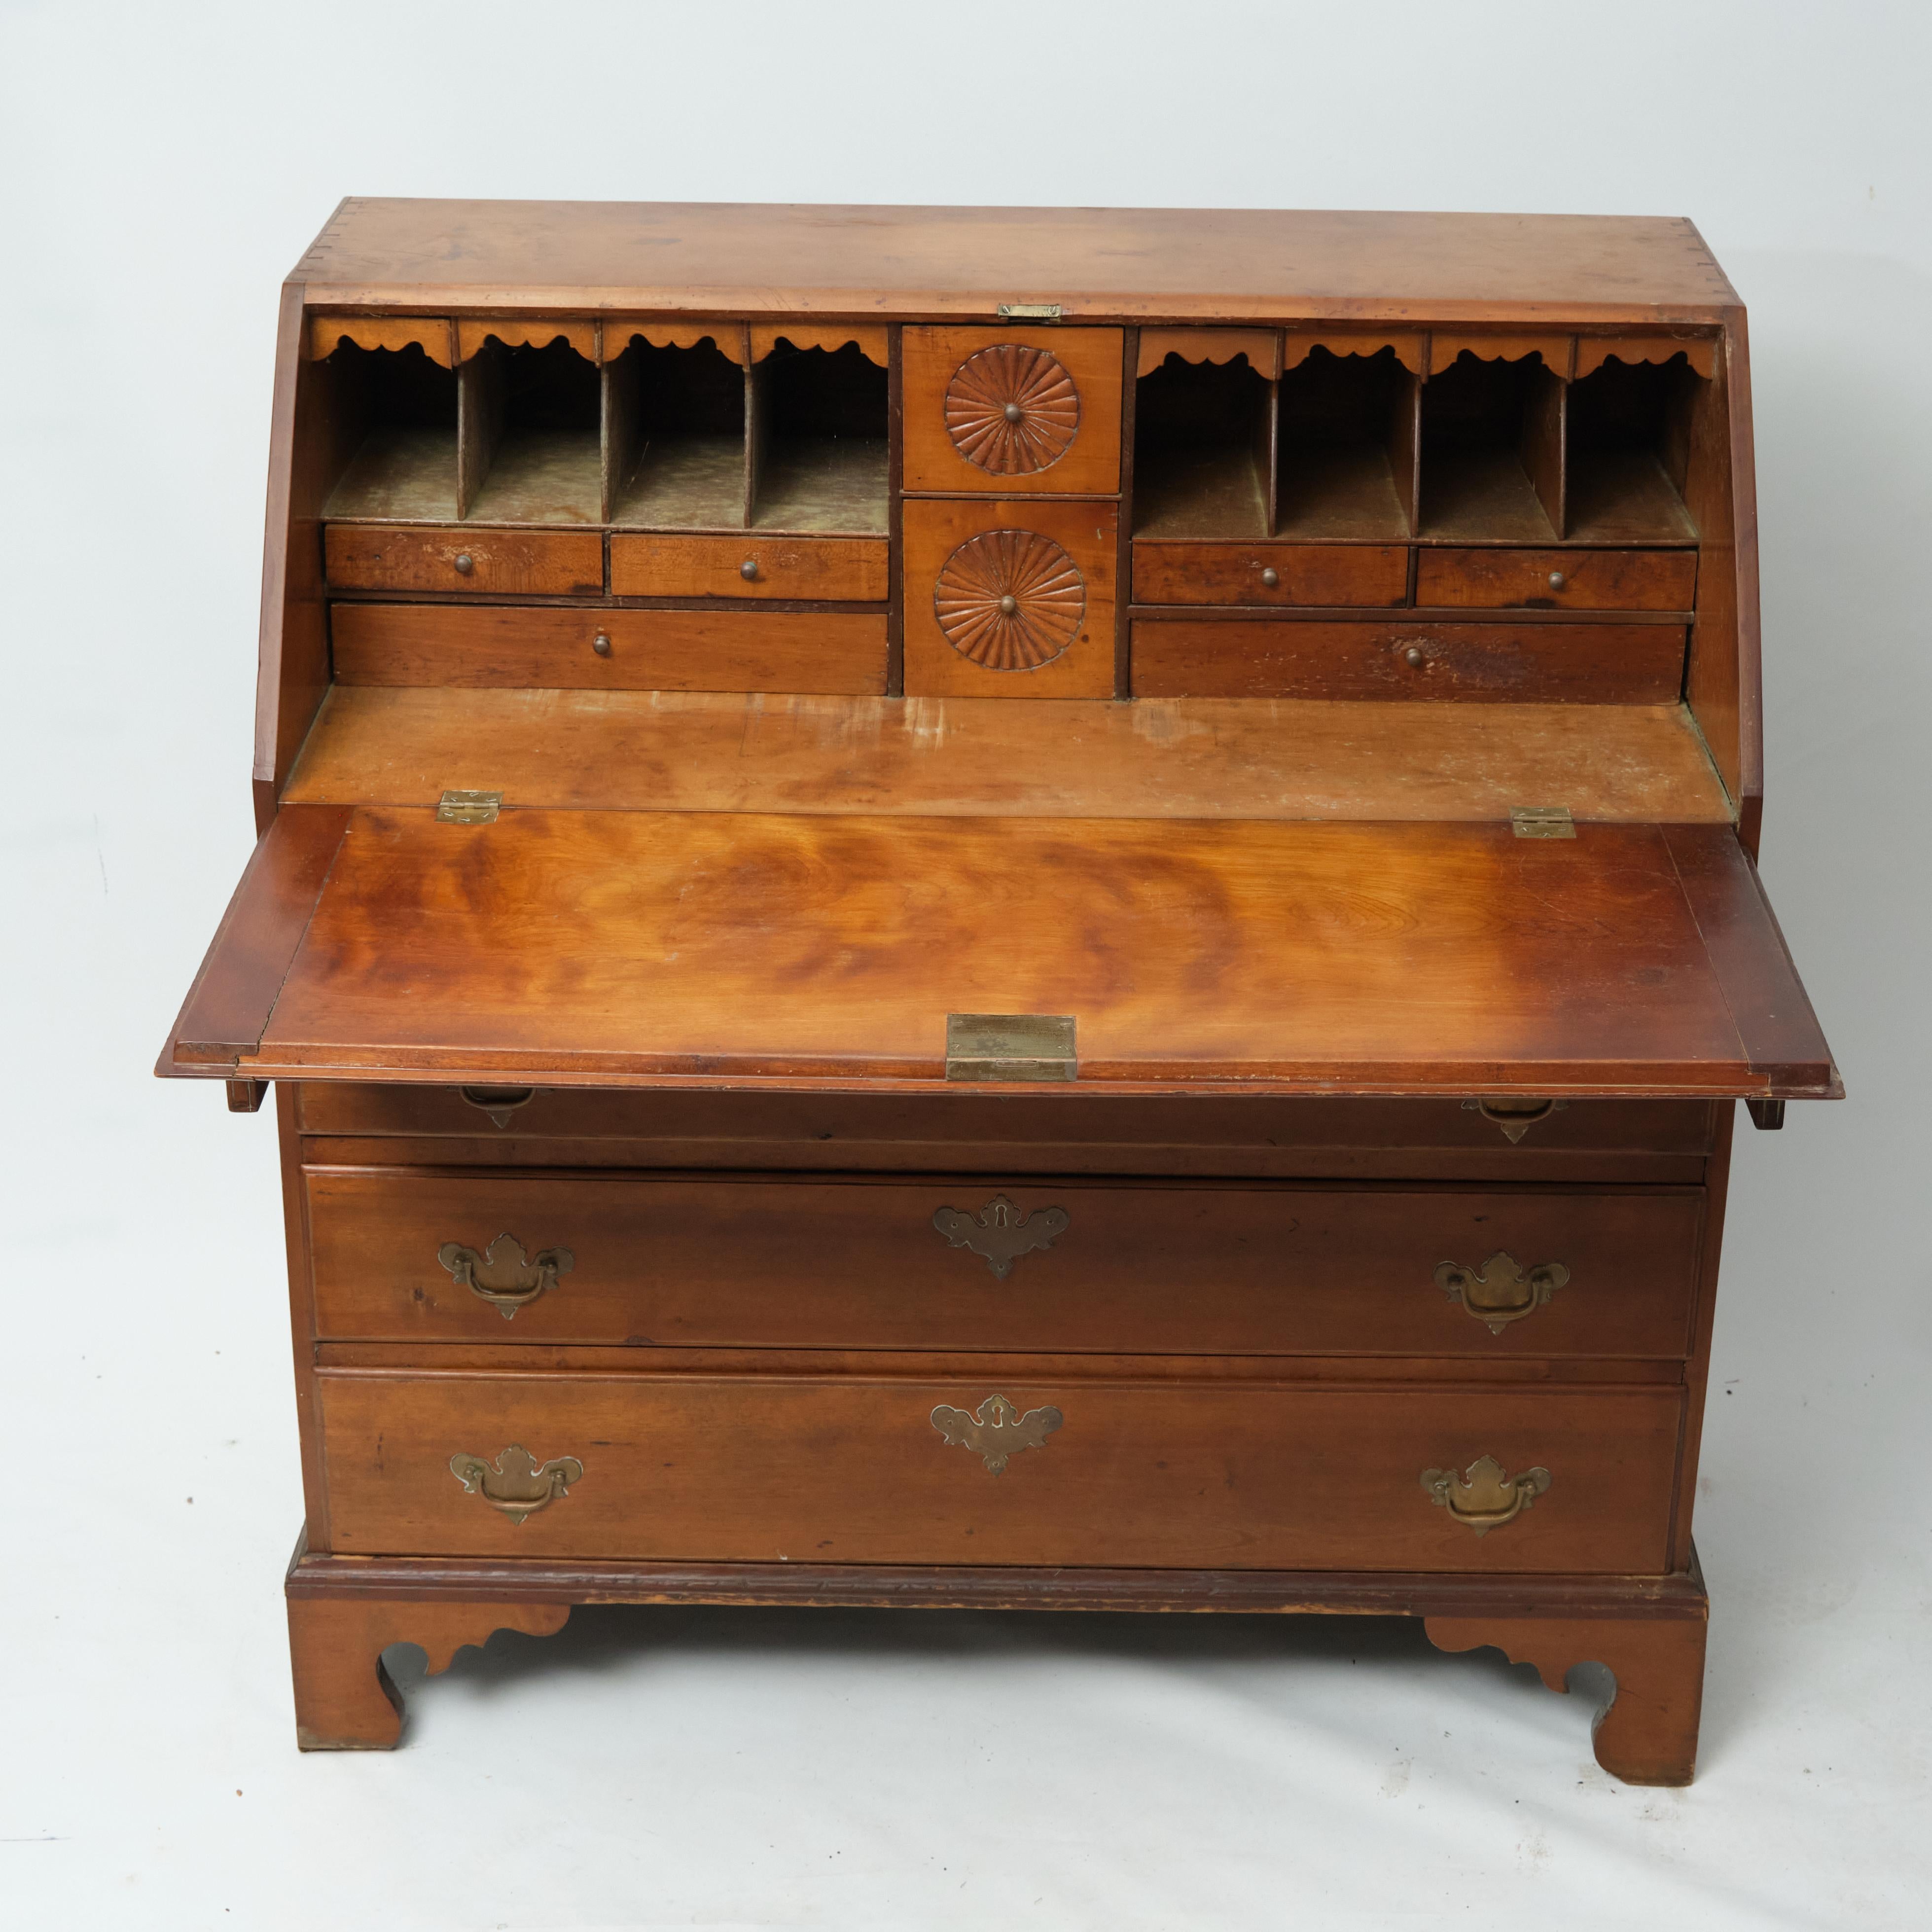 American Chippendale Maple Slant-Front Desk, Late 18th or Early 19th Century For Sale 2